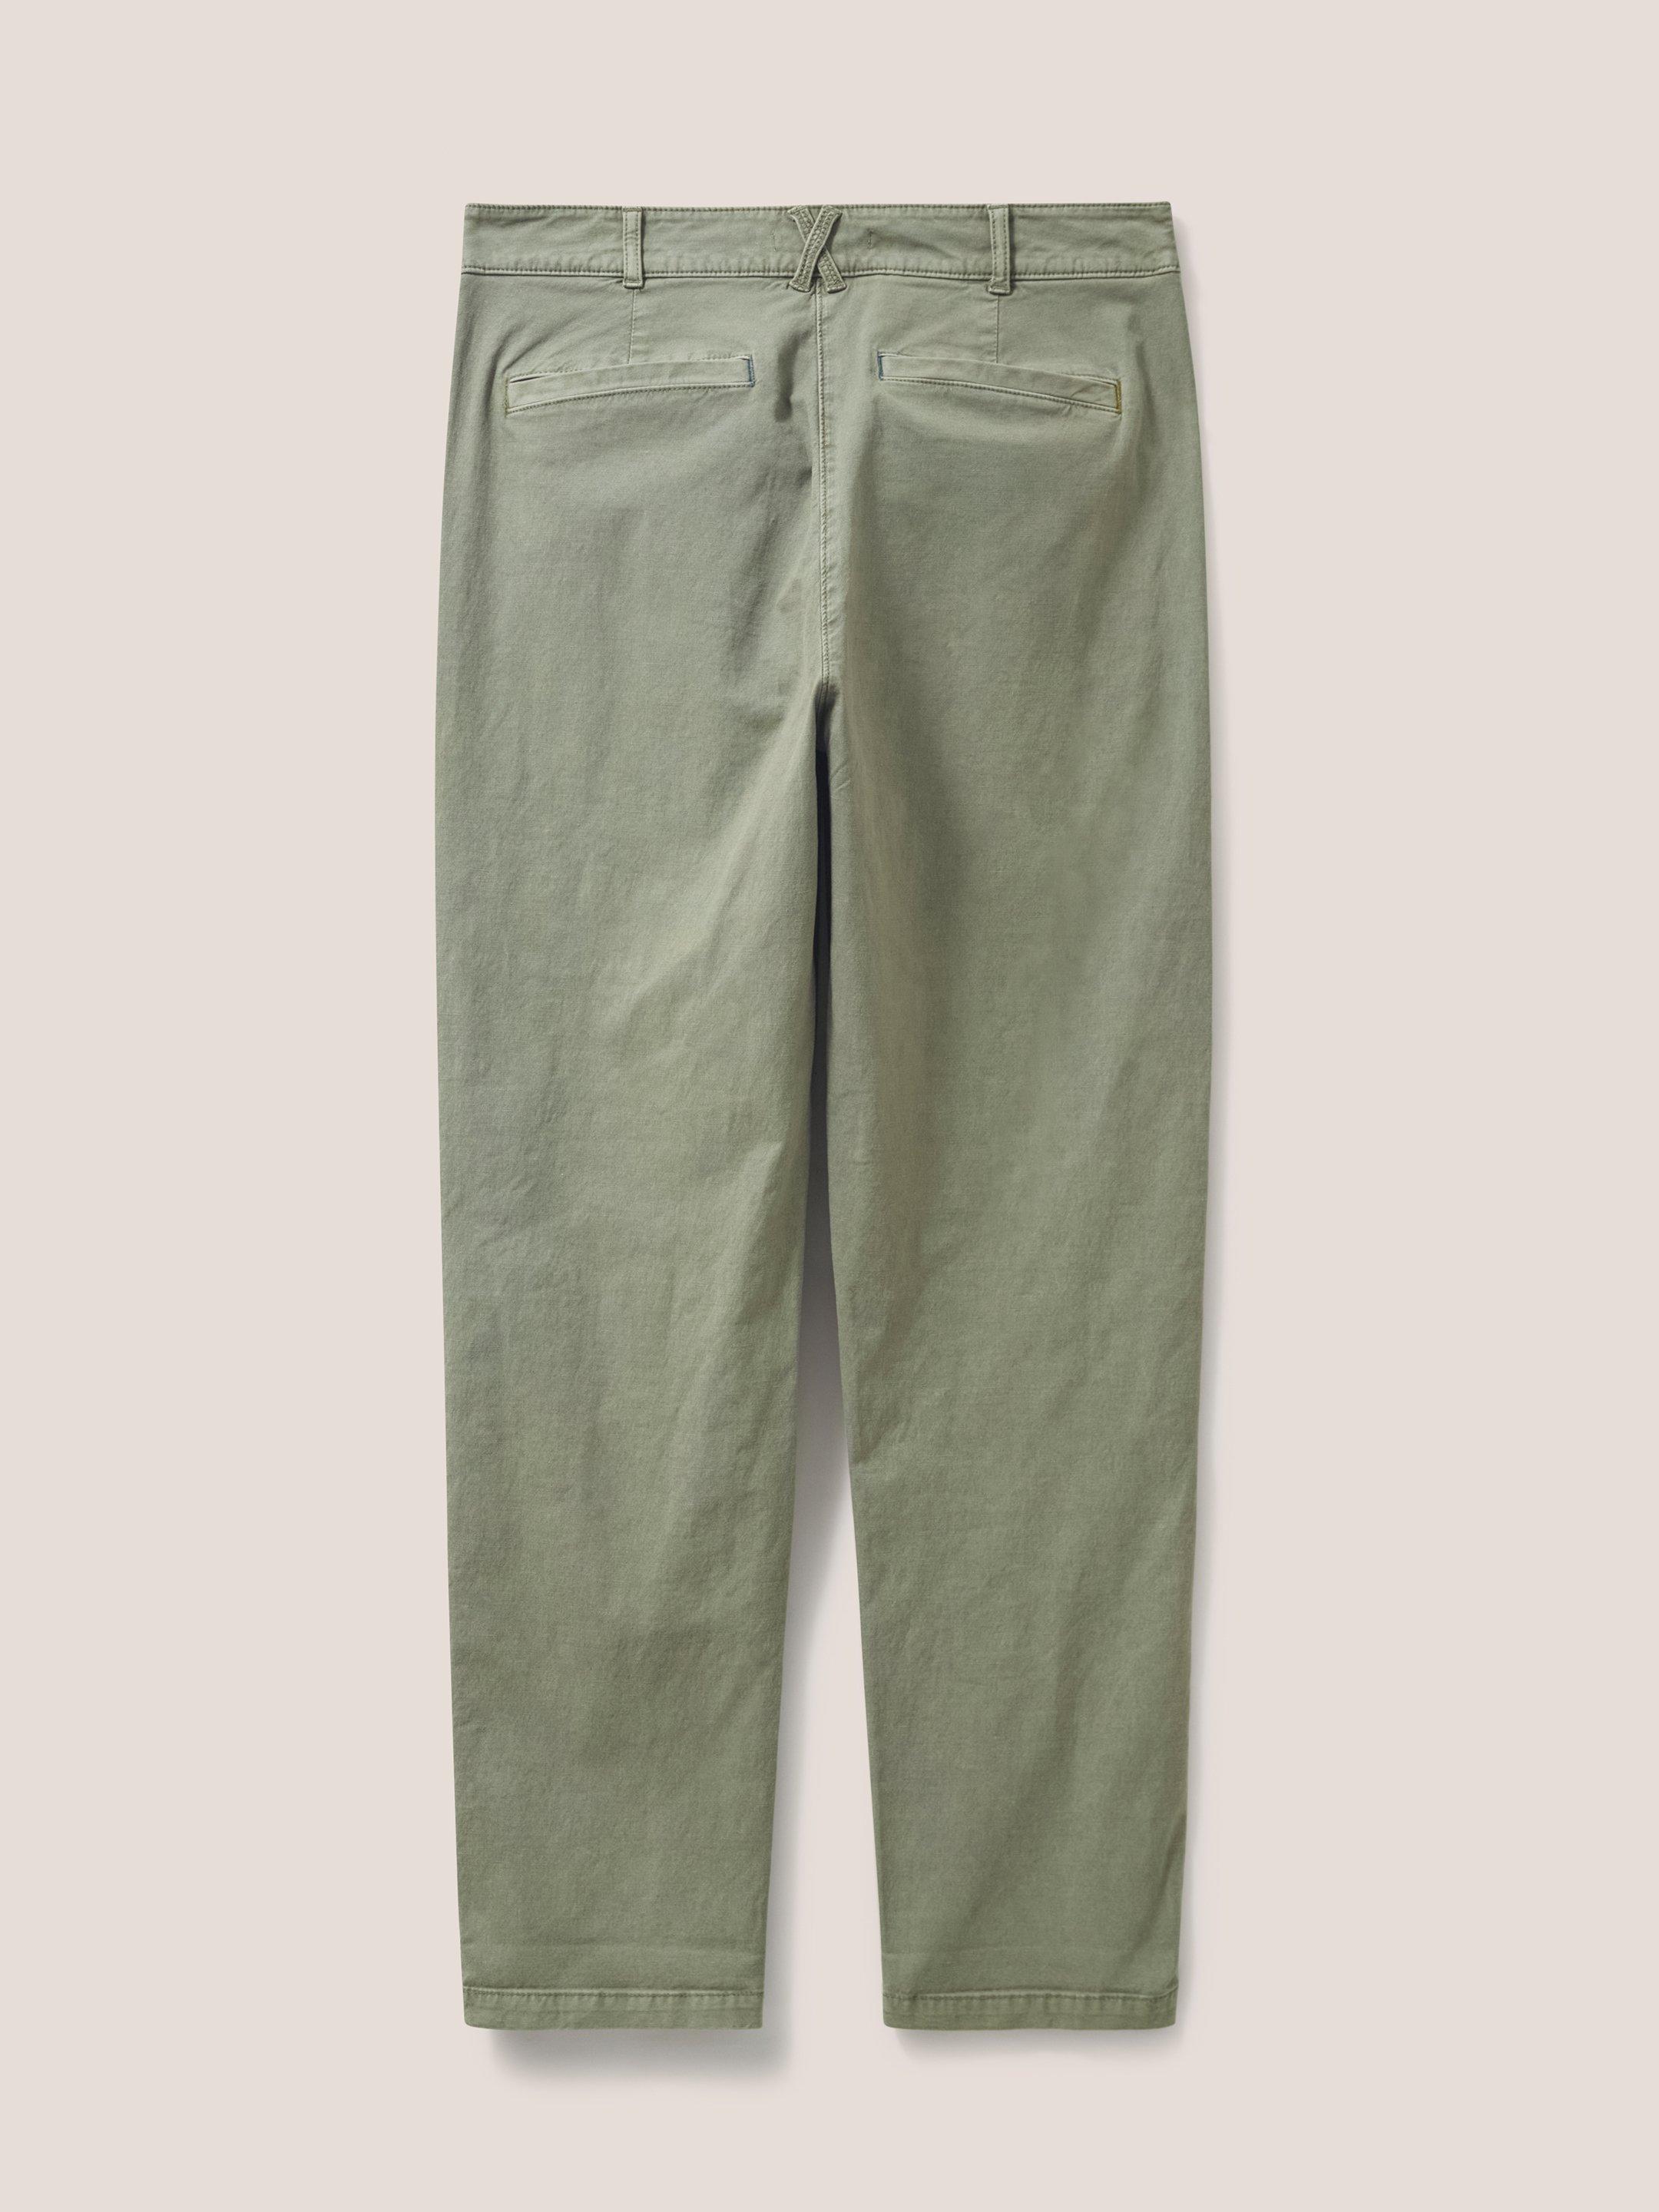 Twister Chino in MID GREEN - FLAT BACK